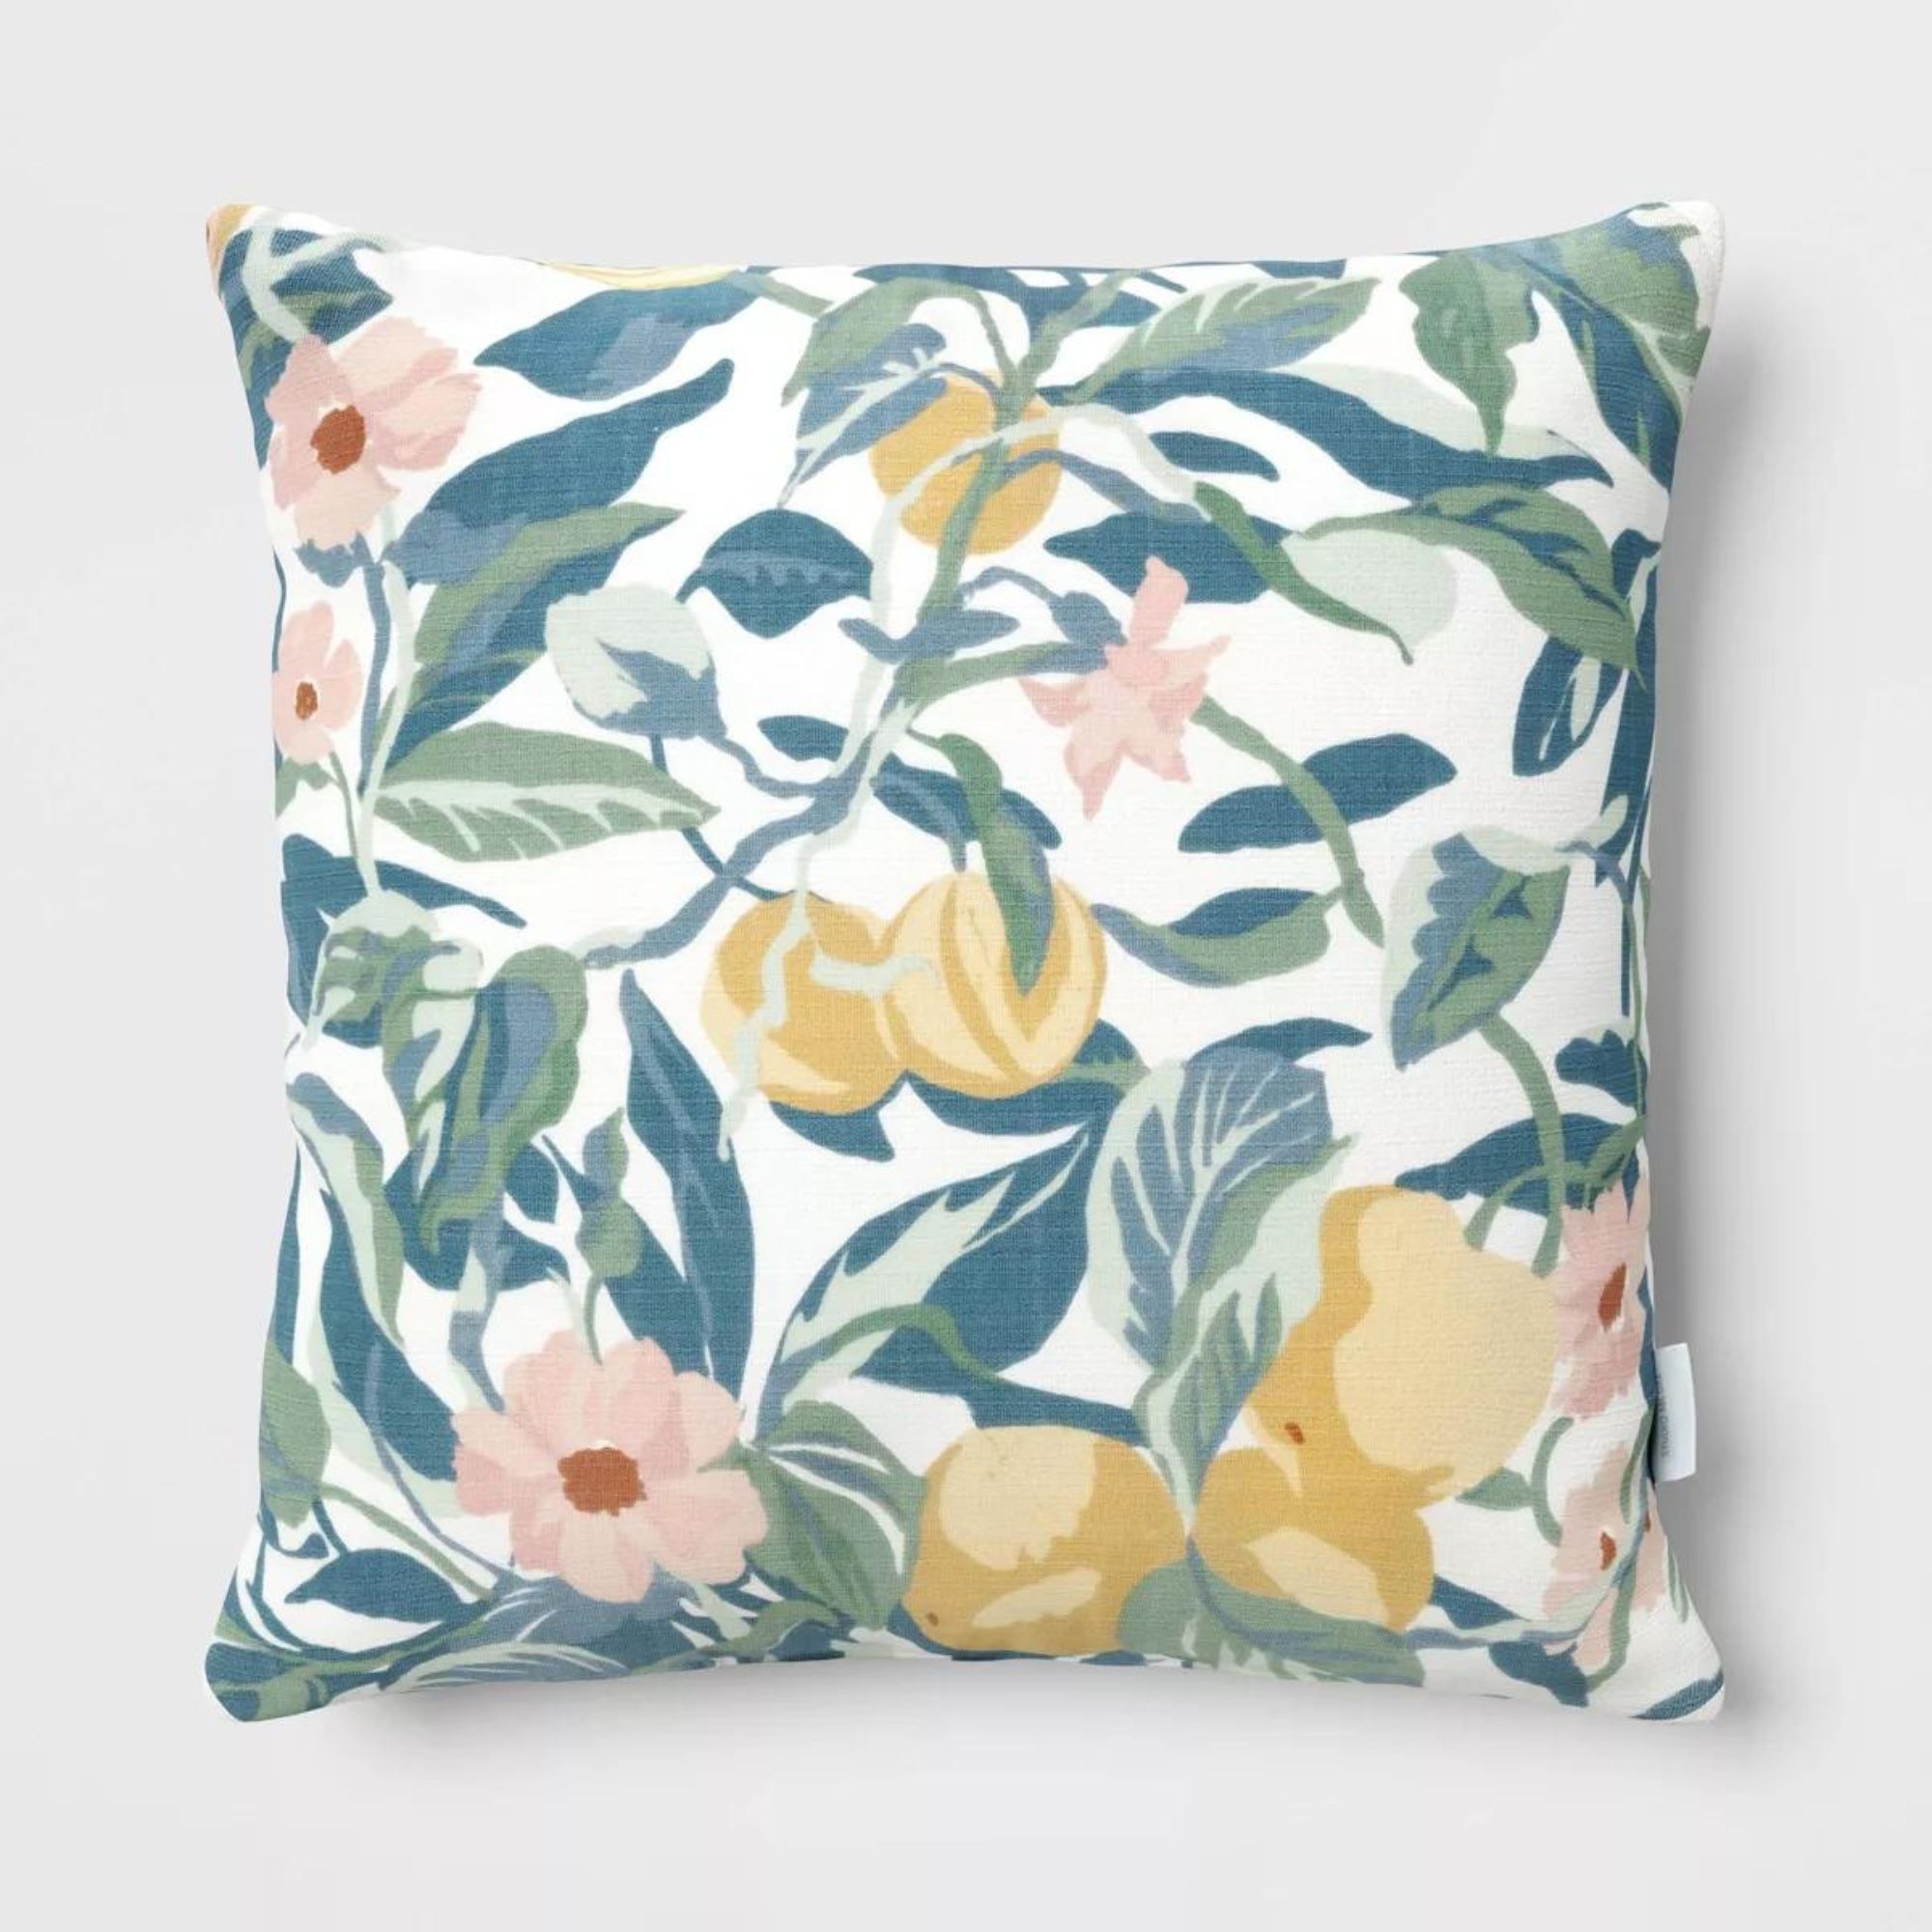 Fruit & Floral Square Indoor Outdoor Throw Pillow